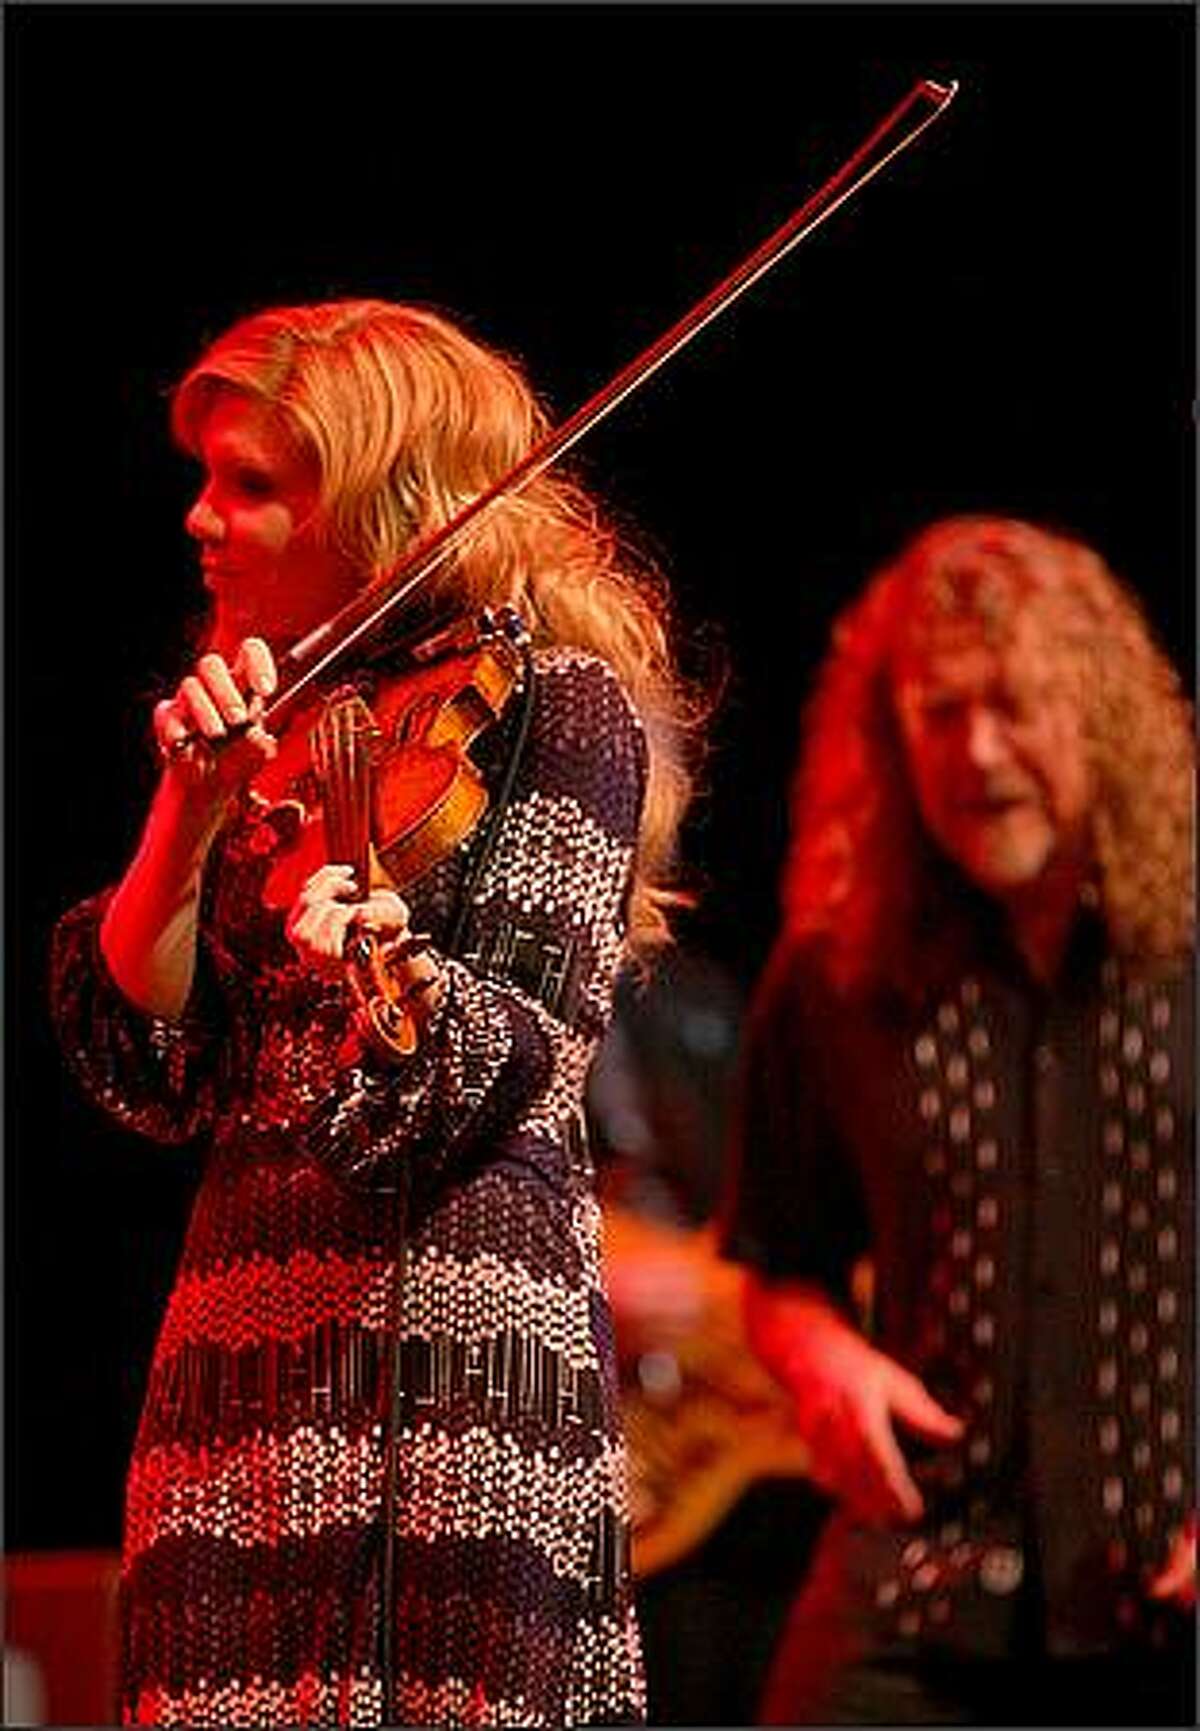 Robert Plant and Alison Krauss perform together at the WaMu Theater in Seattle on Wednesday.